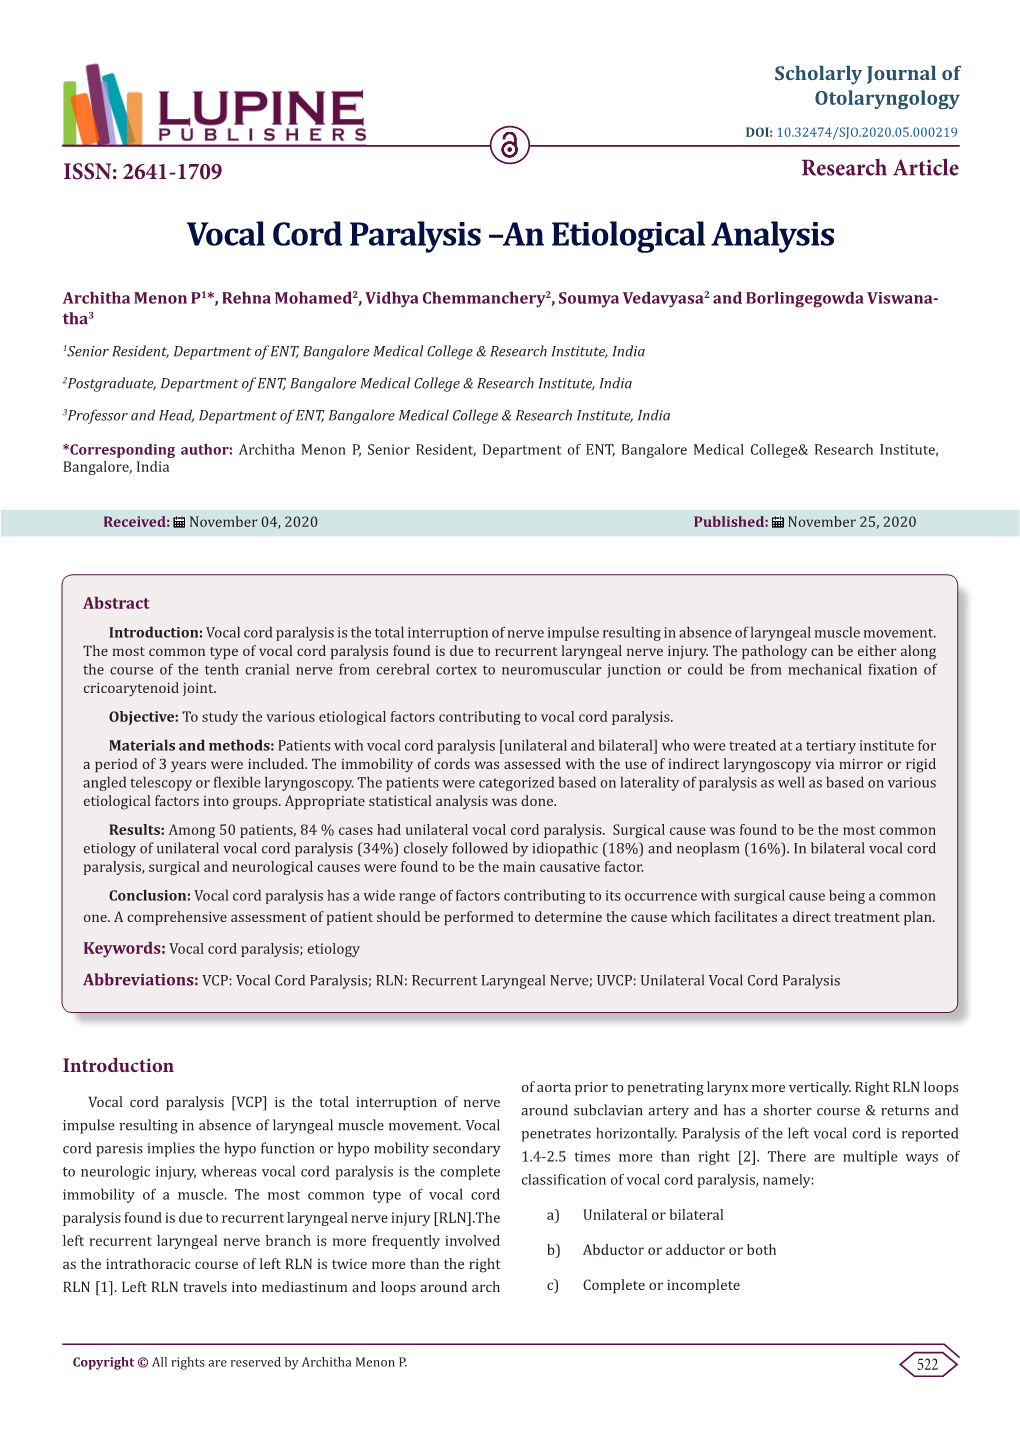 Vocal Cord Paralysis –An Etiological Analysis